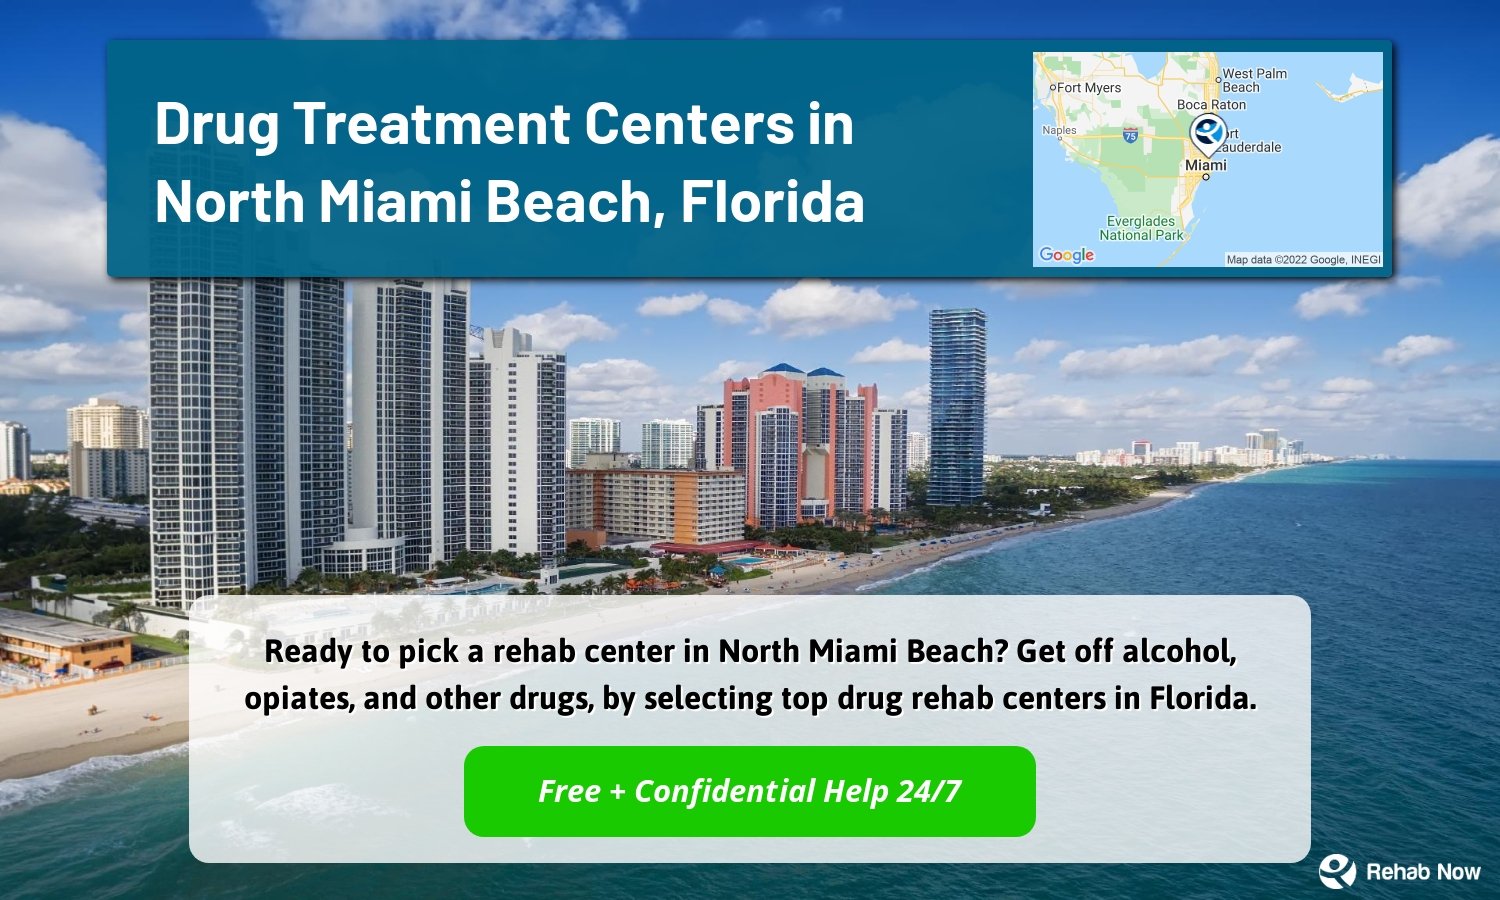 Ready to pick a rehab center in North Miami Beach? Get off alcohol, opiates, and other drugs, by selecting top drug rehab centers in Florida.